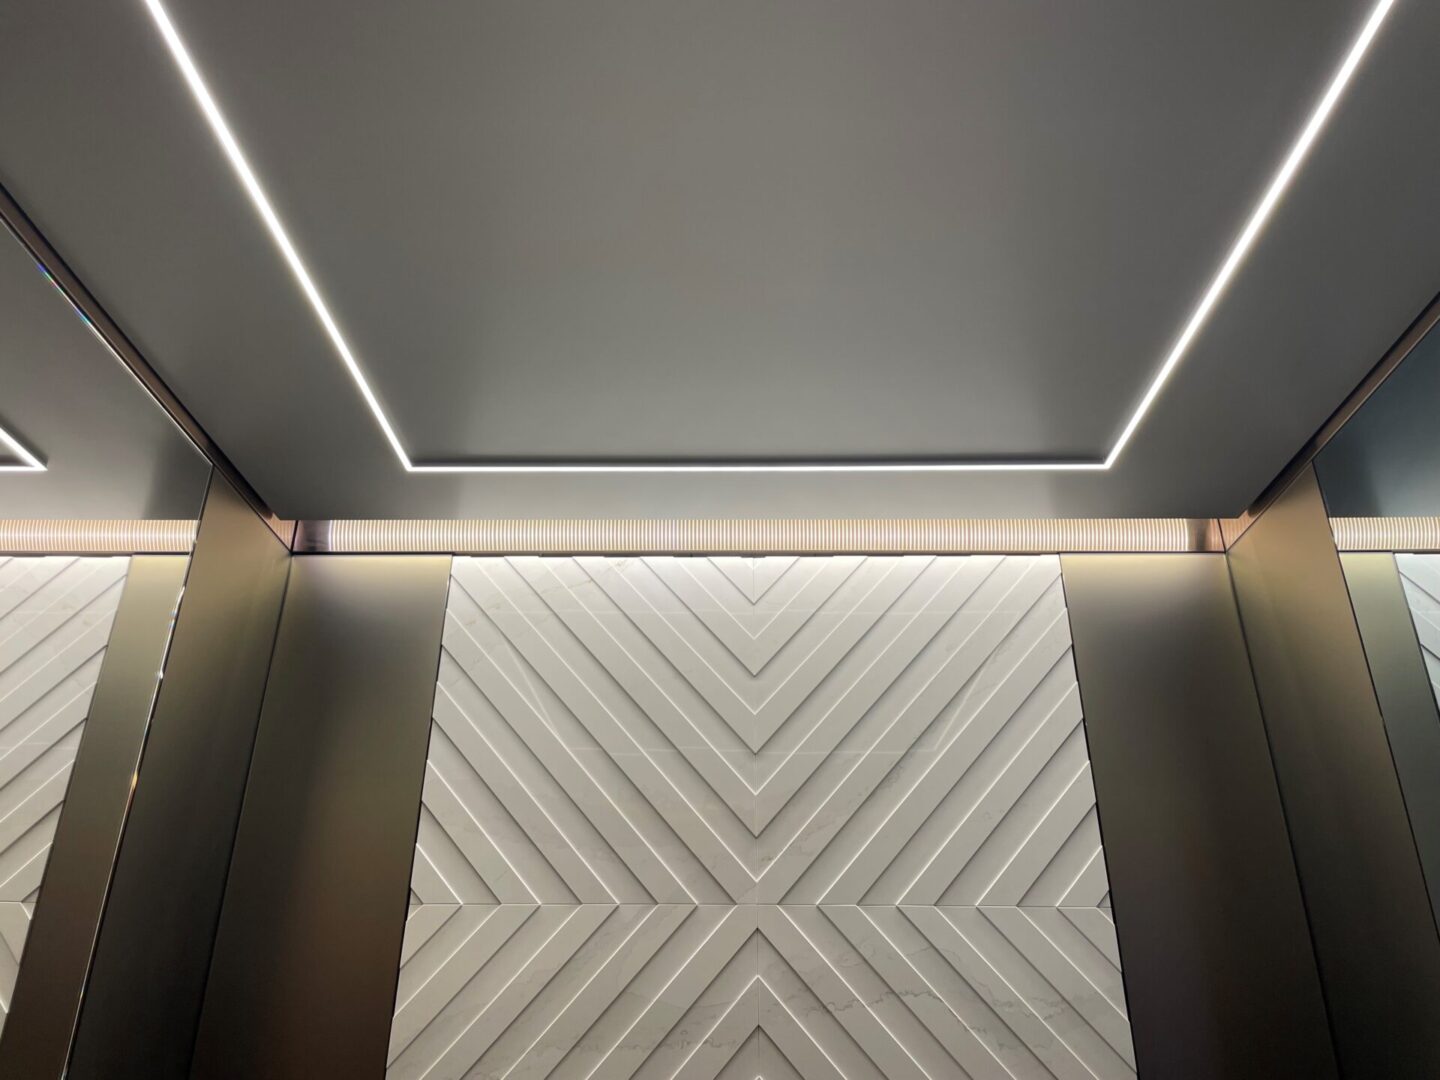 A view of the ceiling in an elevator.